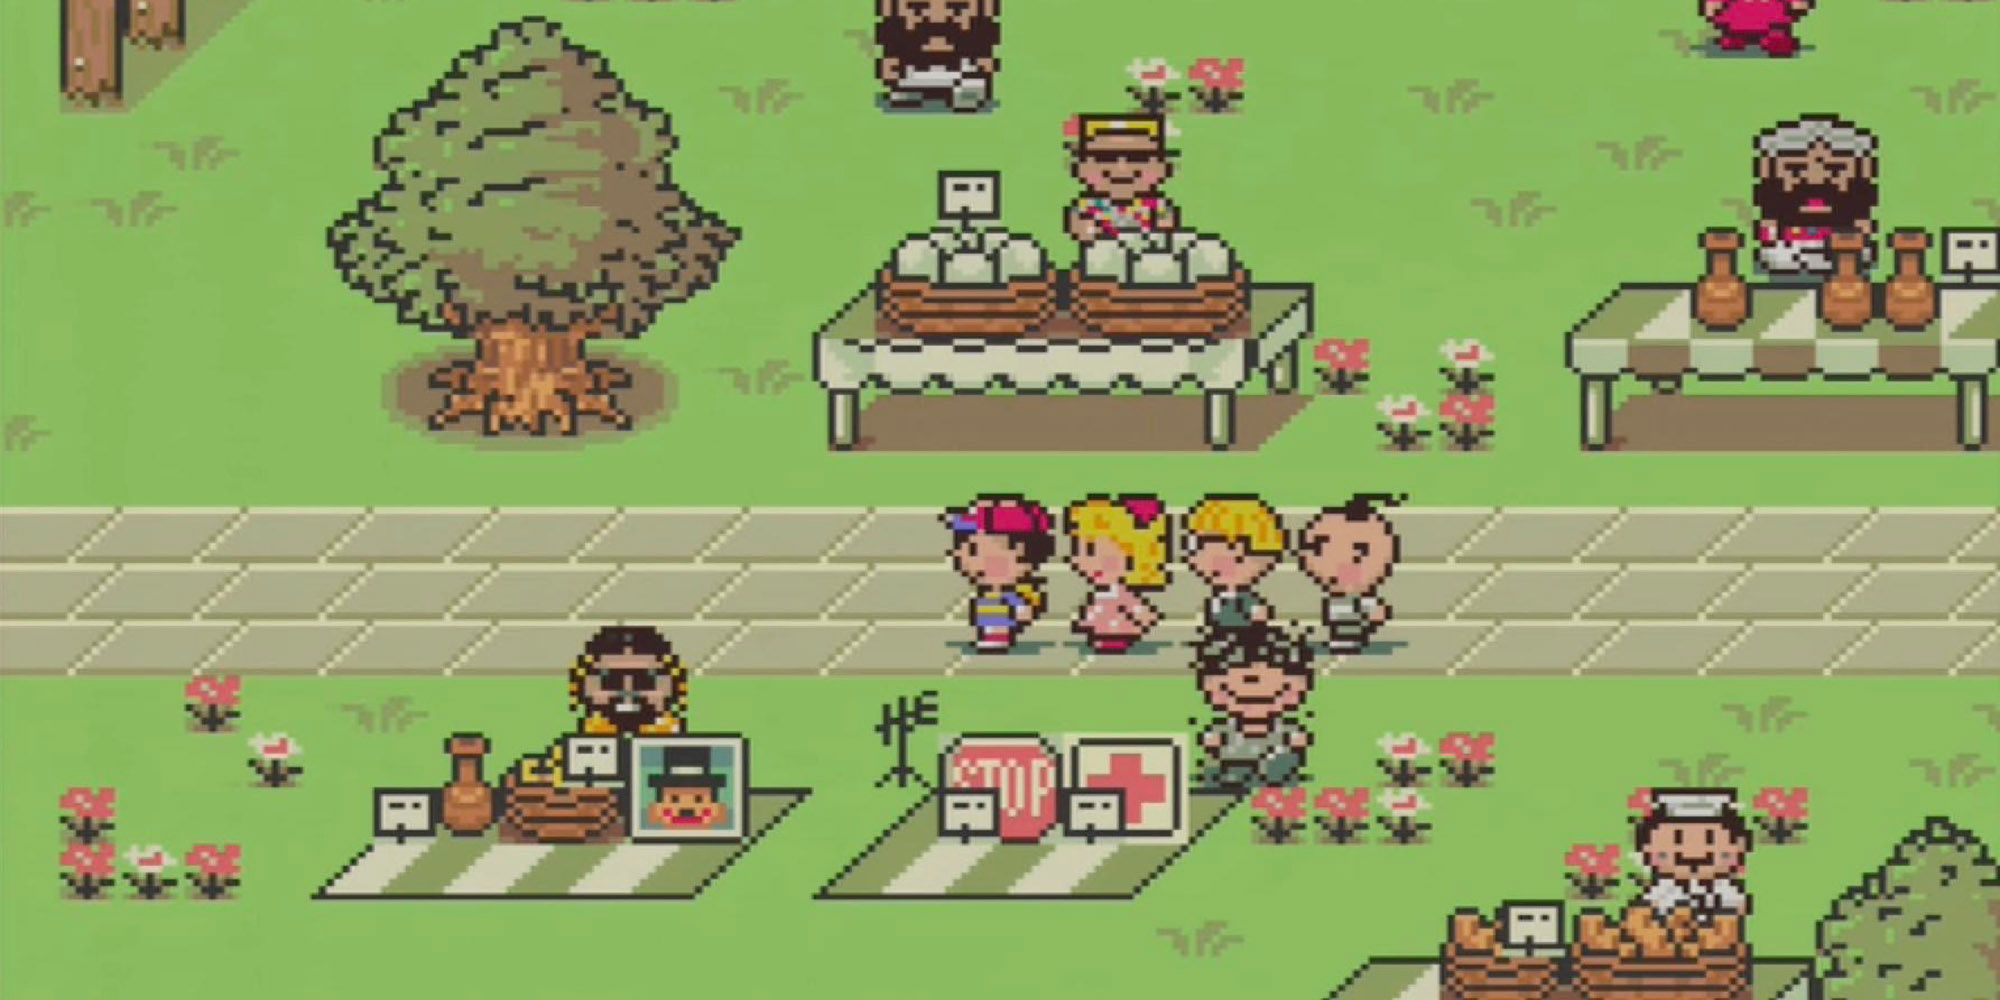 Ness visiting the Market in Twoson in Earthbound.